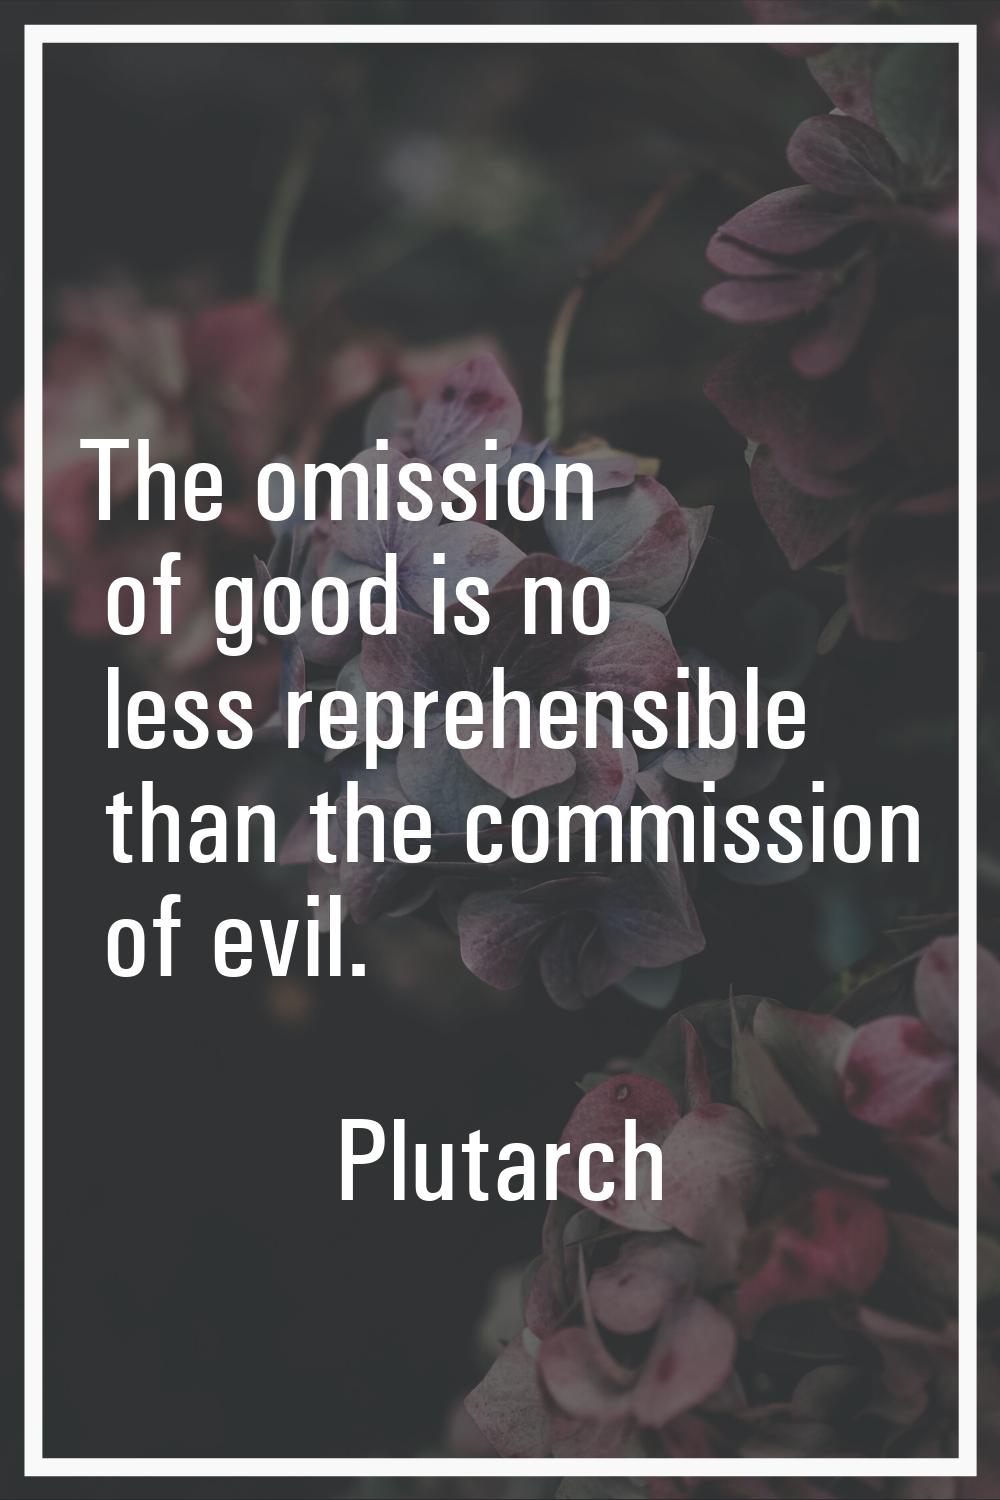 The omission of good is no less reprehensible than the commission of evil.